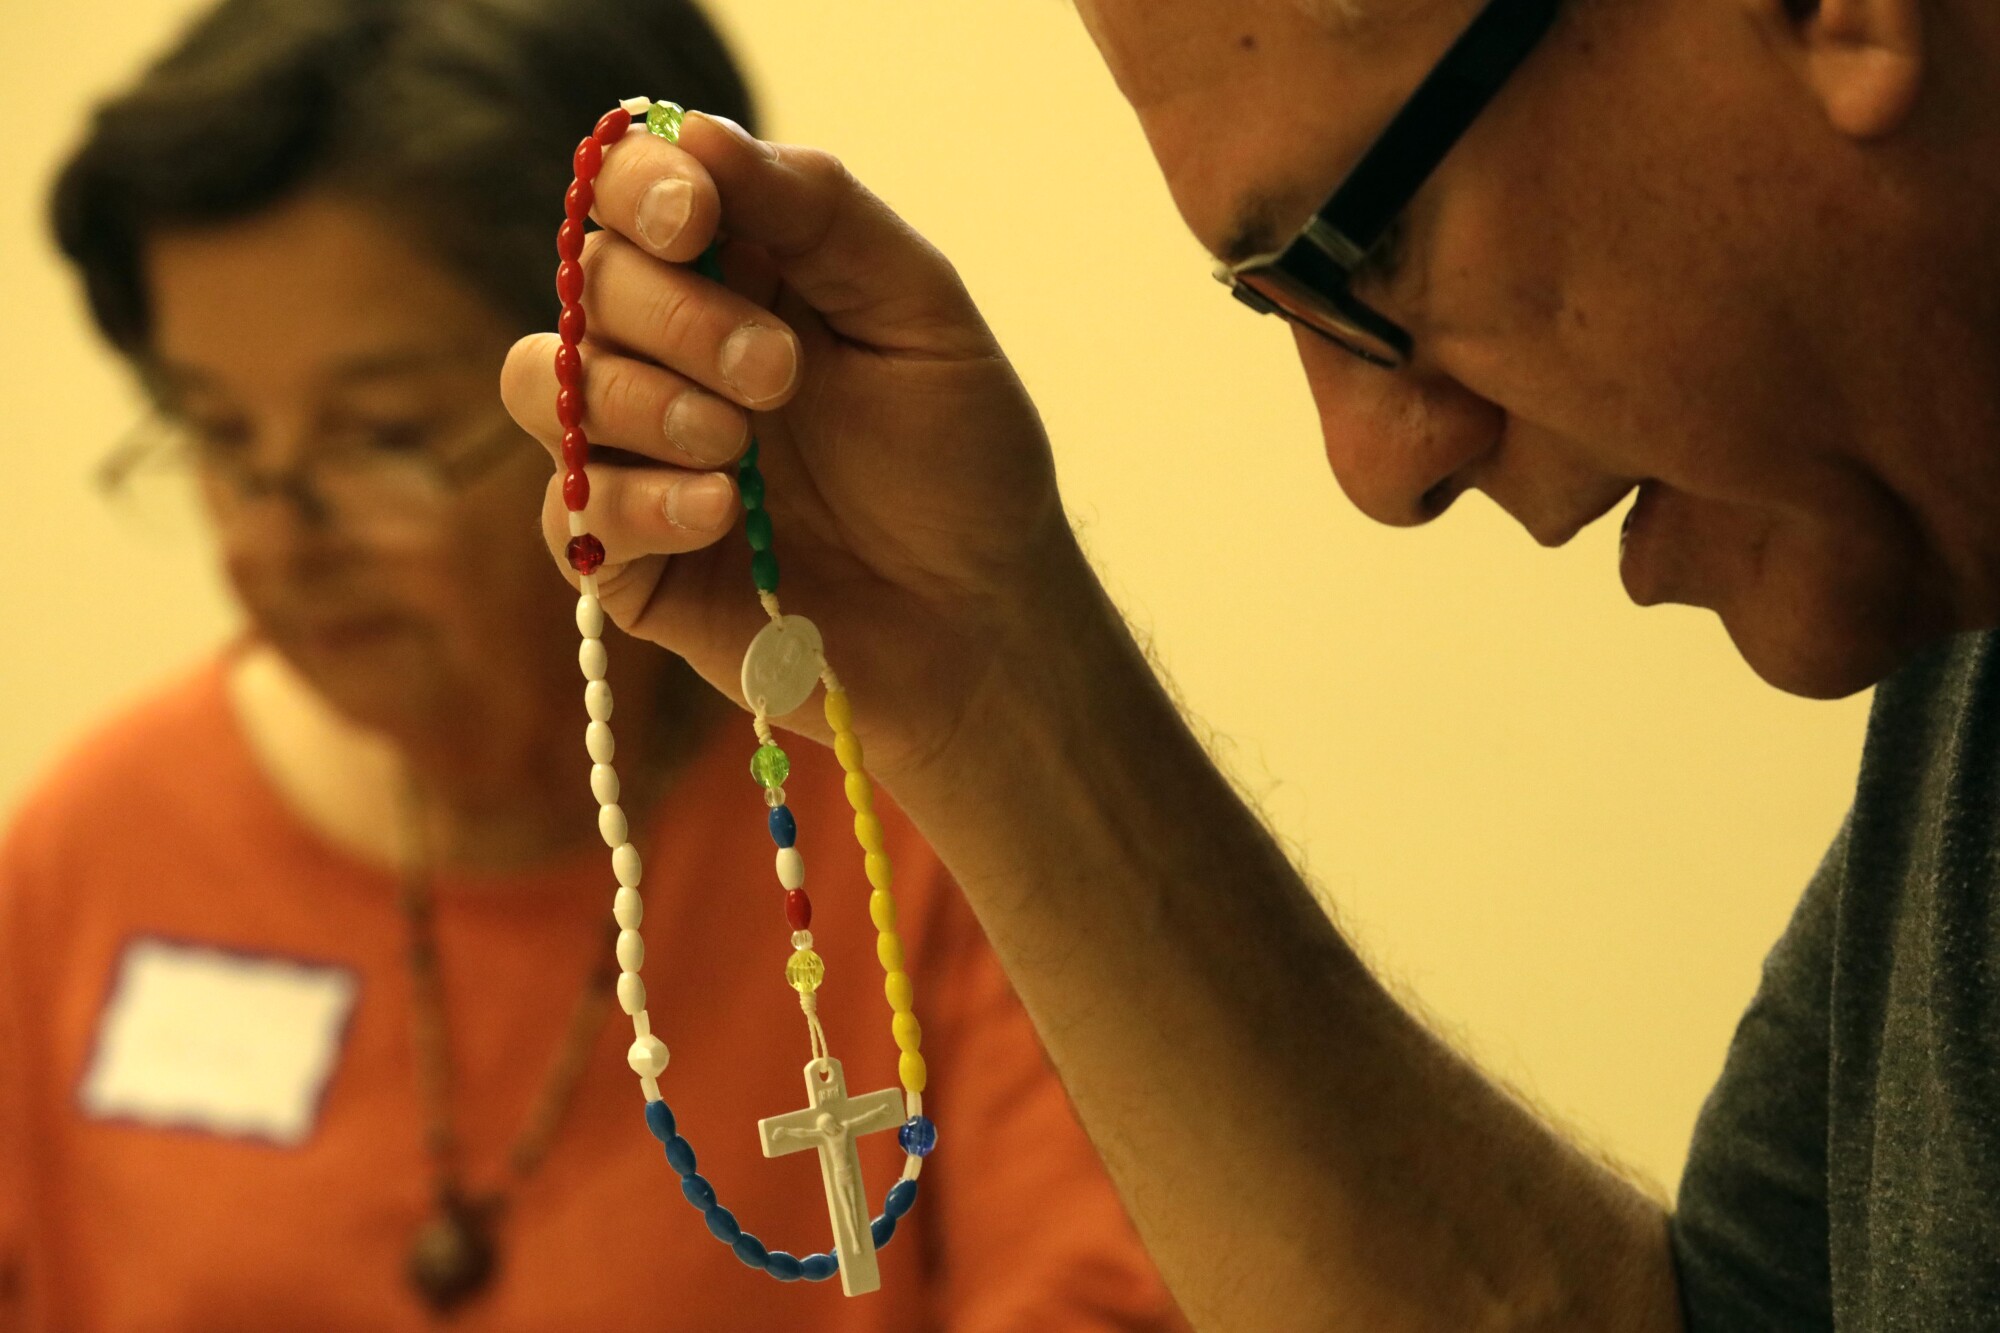 Ray Martinez and Martha Olivares recite the rosary during a meeting of St. Dymphna's Disciples.